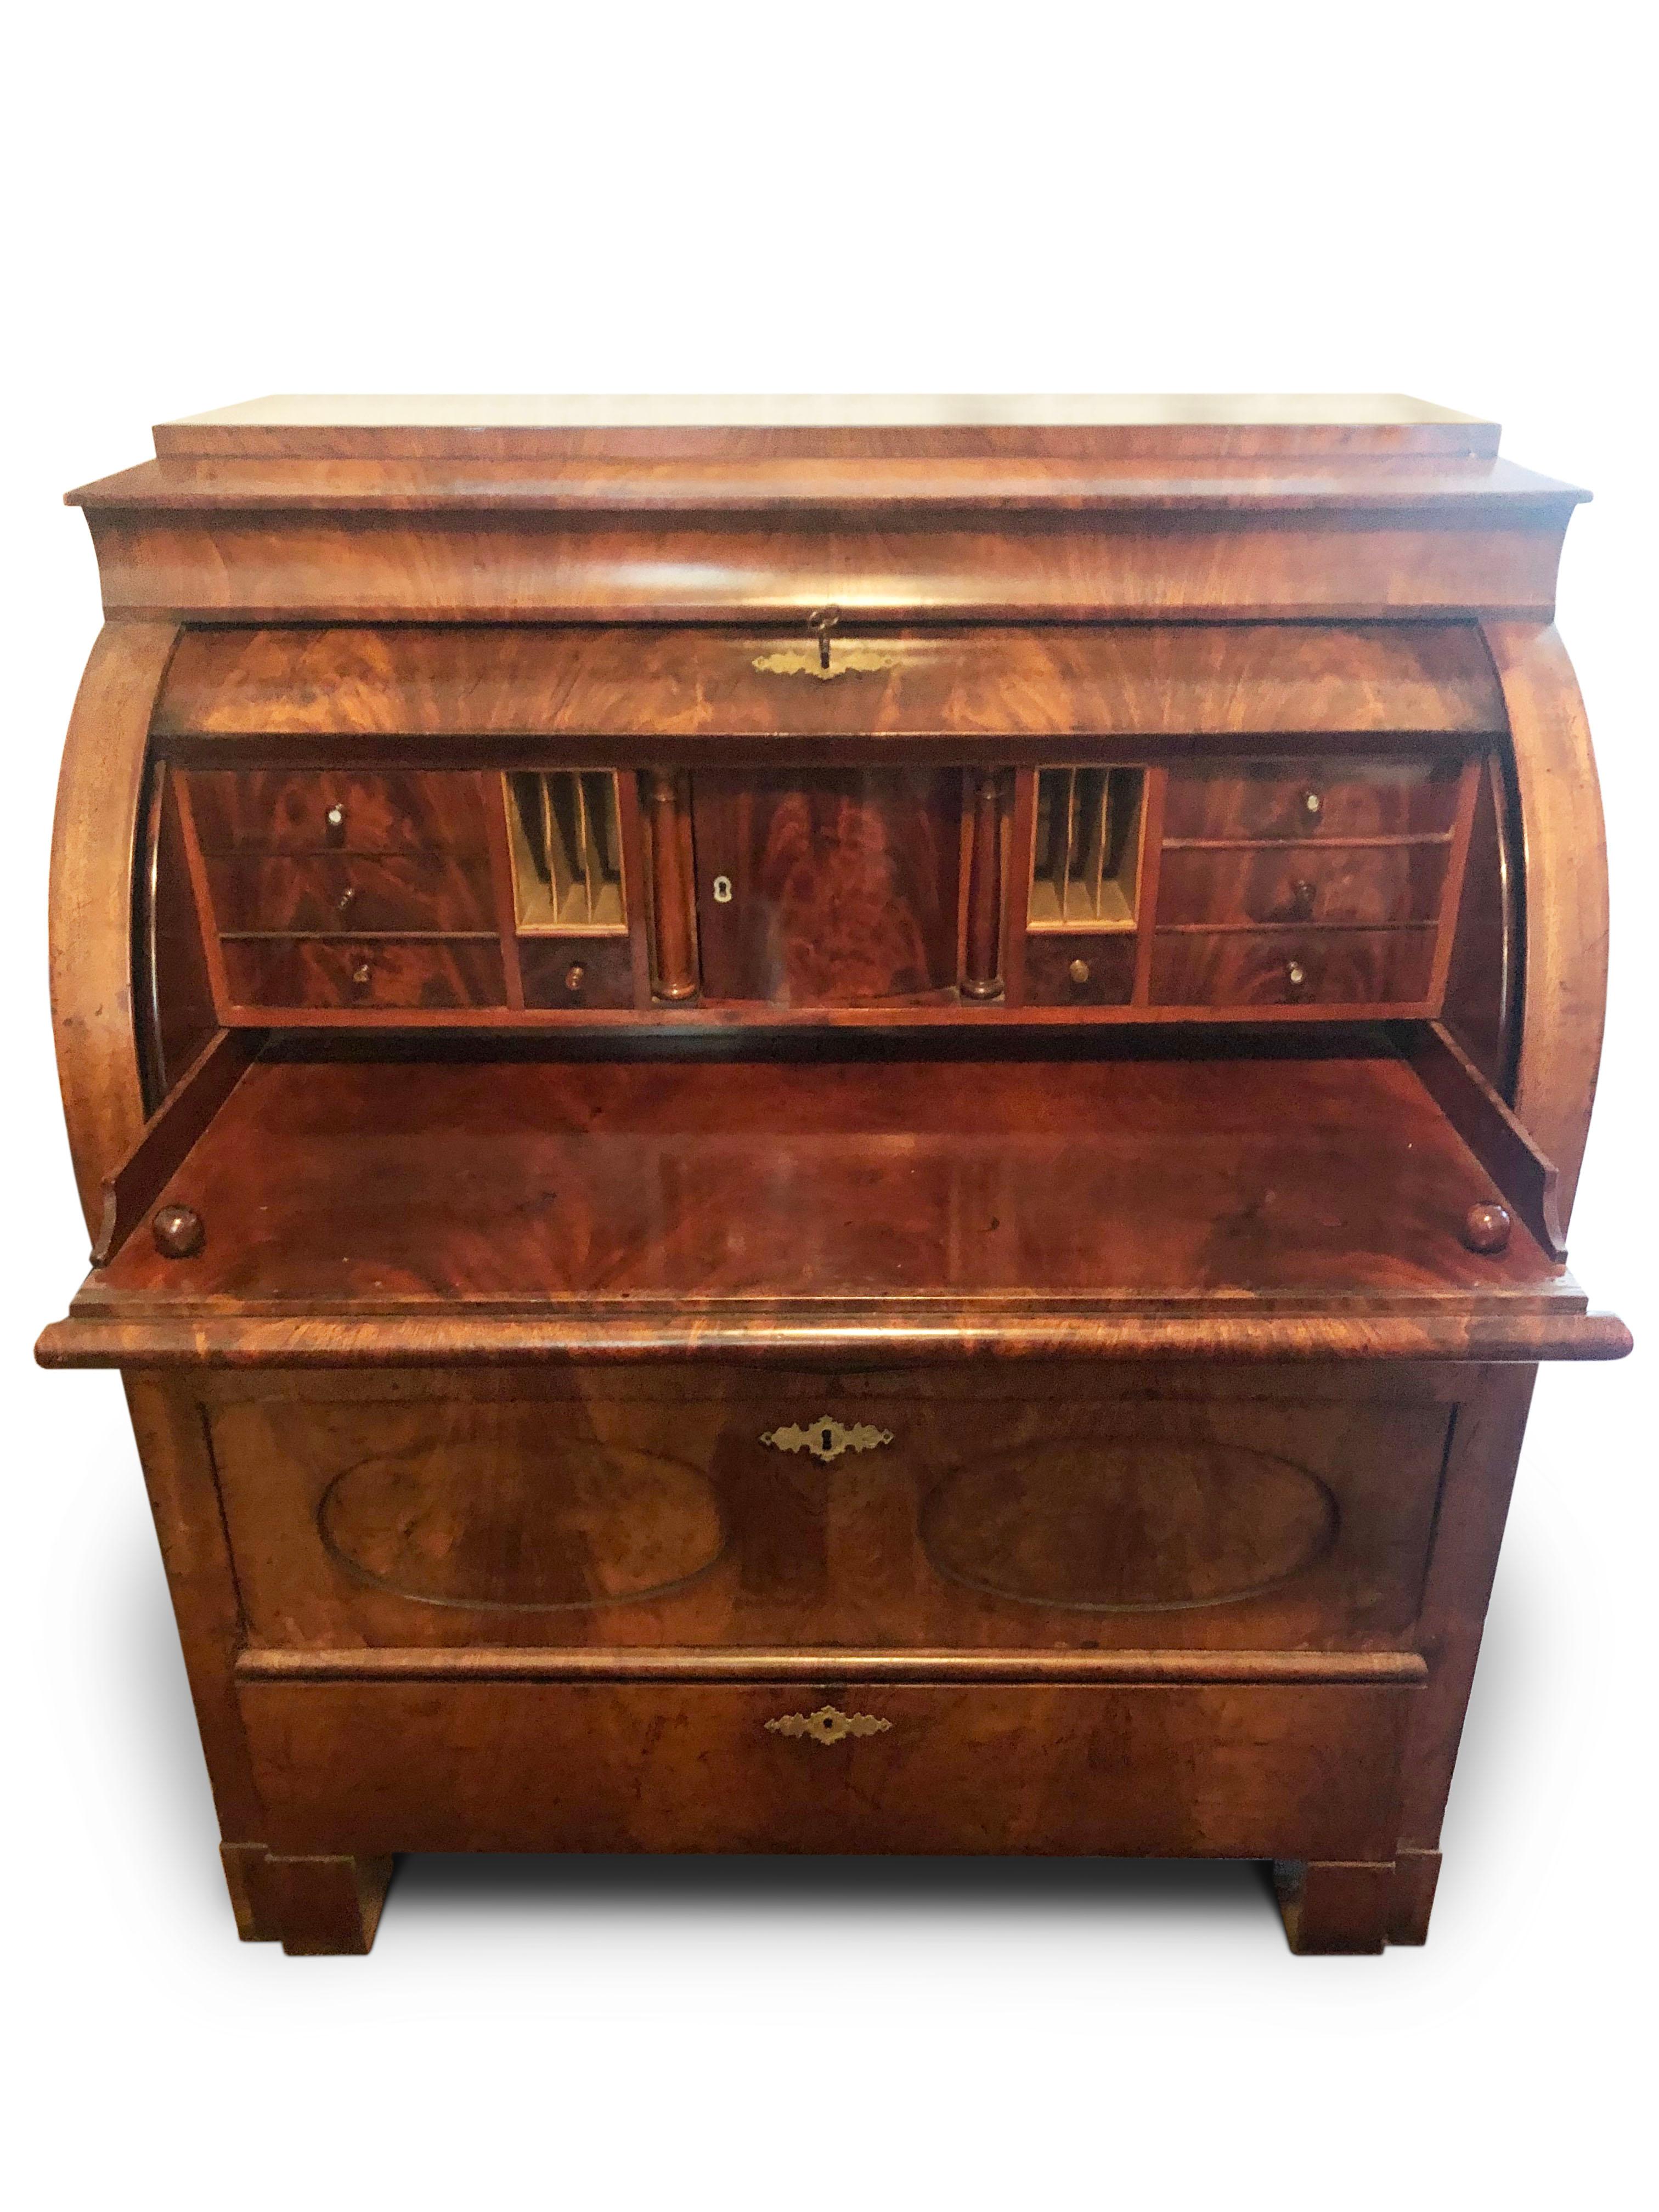 Bureau/writing desk walnut Biedermeier, circa 1840.

Roll top front, opening to a draw out sliding desk surface, with central cupboard flanked by two columns, pigeon holes and various drawers.
Three larger drawers beneath decorated with